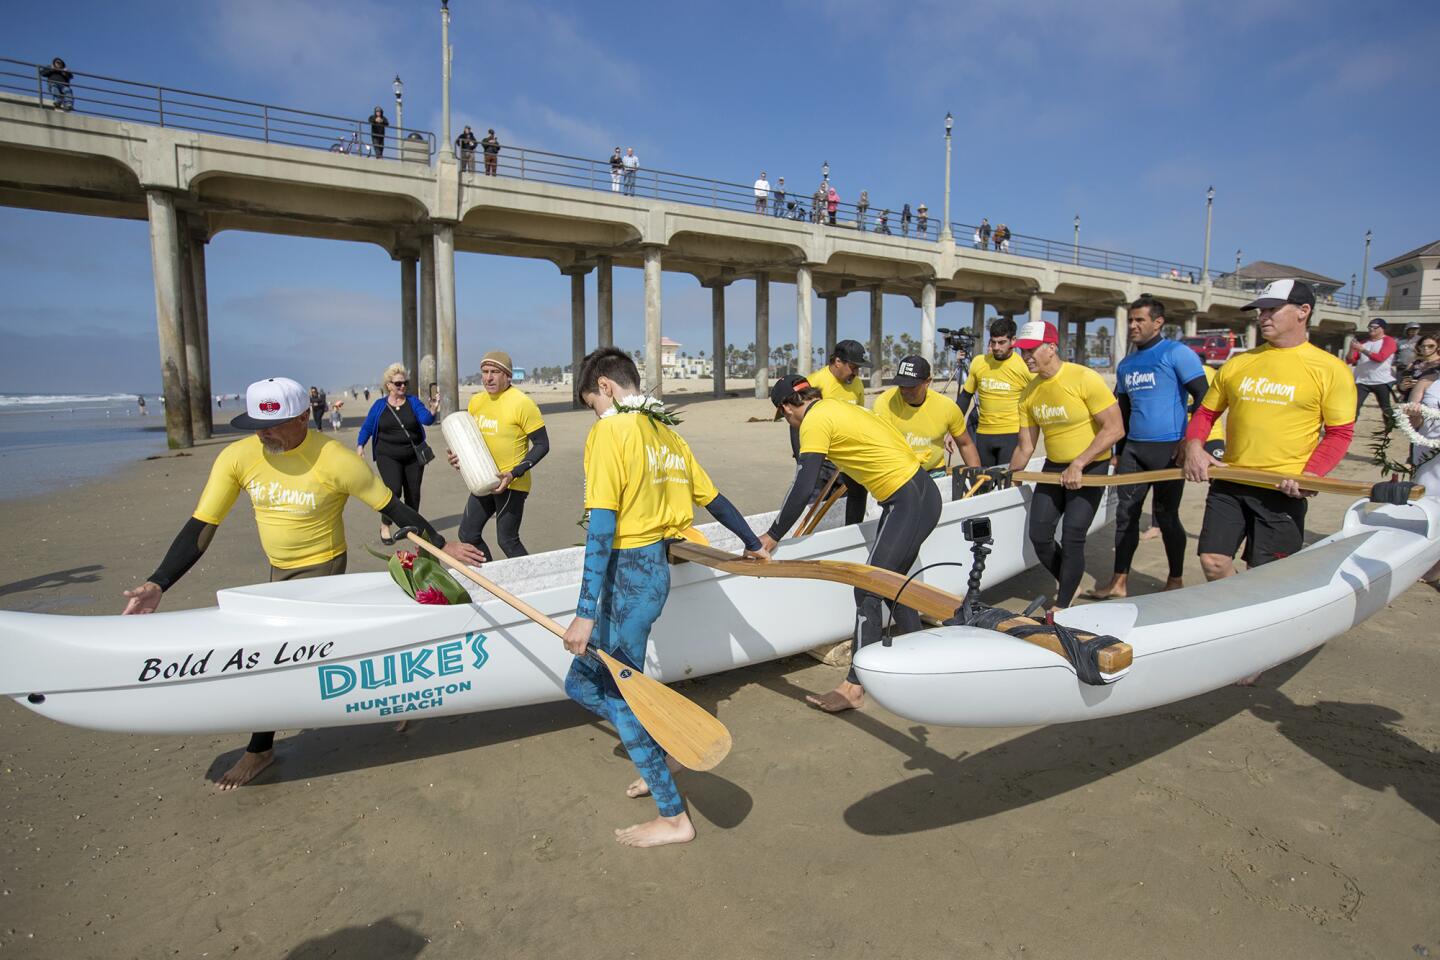 Outrigger surf canoe rides start at the Huntington Beach Pier